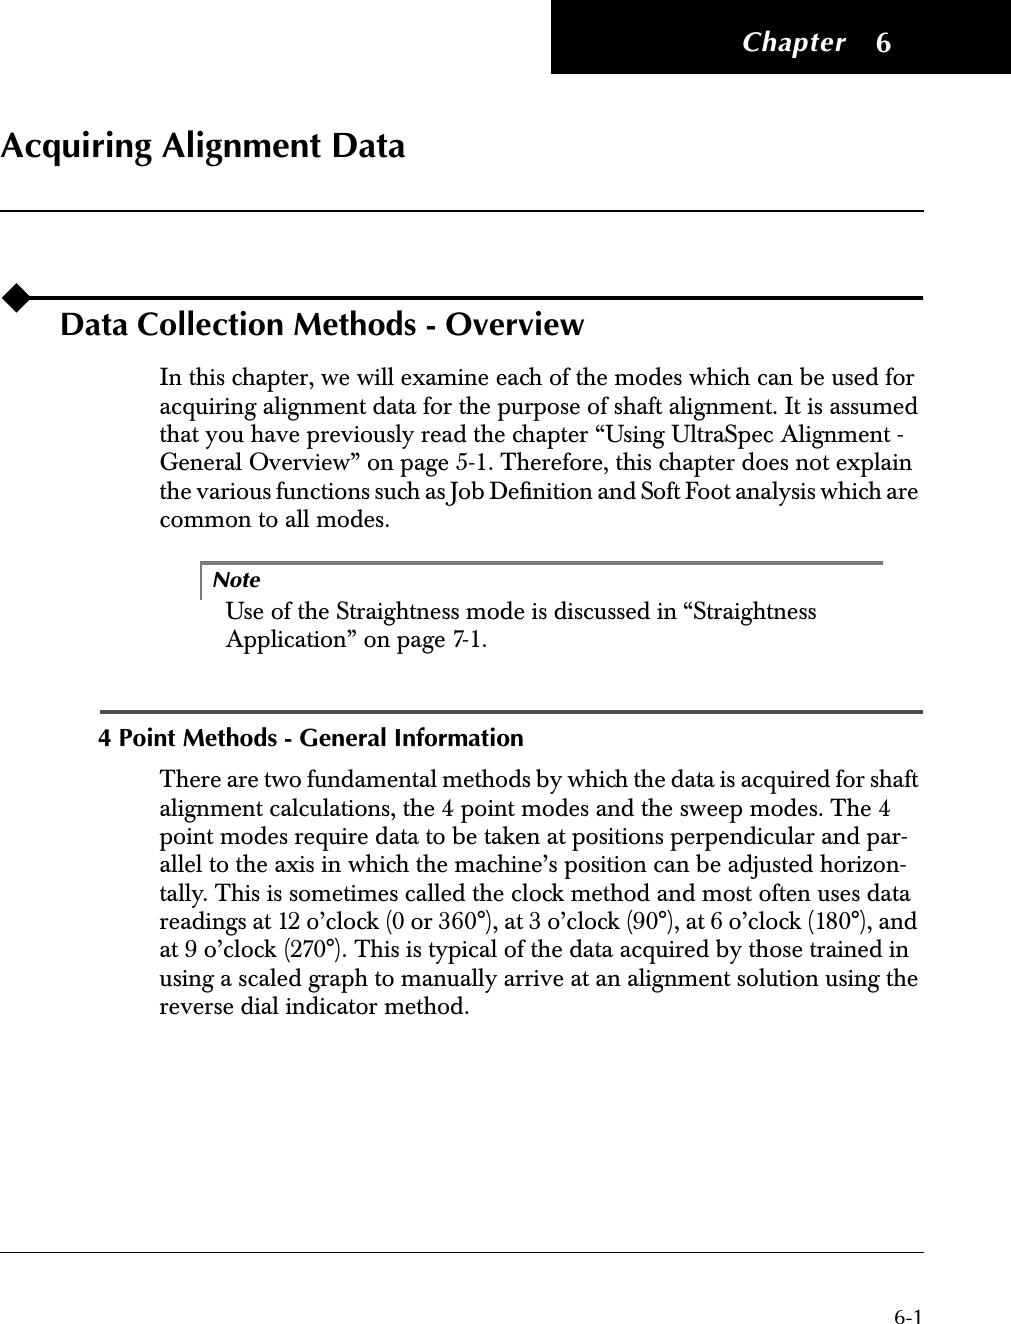  Chapter 6-1 6 Acquiring Alignment Data Data Collection Methods - Overview In this chapter, we will examine each of the modes which can be used for acquiring alignment data for the purpose of shaft alignment. It is assumed that you have previously read the chapter “Using UltraSpec Alignment - General Overview” on page 5-1. Therefore, this chapter does not explain the various functions such as Job Deﬁnition and Soft Foot analysis which are common to all modes.Note Use of the Straightness mode is discussed in “Straightness Application” on page 7-1. 4 Point Methods - General Information There are two fundamental methods by which the data is acquired for shaft alignment calculations, the 4 point modes and the sweep modes. The 4 point modes require data to be taken at positions perpendicular and par-allel to the axis in which the machine’s position can be adjusted horizon-tally. This is sometimes called the clock method and most often uses data readings at 12 o’clock (0 or 360°), at 3 o’clock (90°), at 6 o’clock (180°), and at 9 o’clock (270°). This is typical of the data acquired by those trained in using a scaled graph to manually arrive at an alignment solution using the reverse dial indicator method. 42